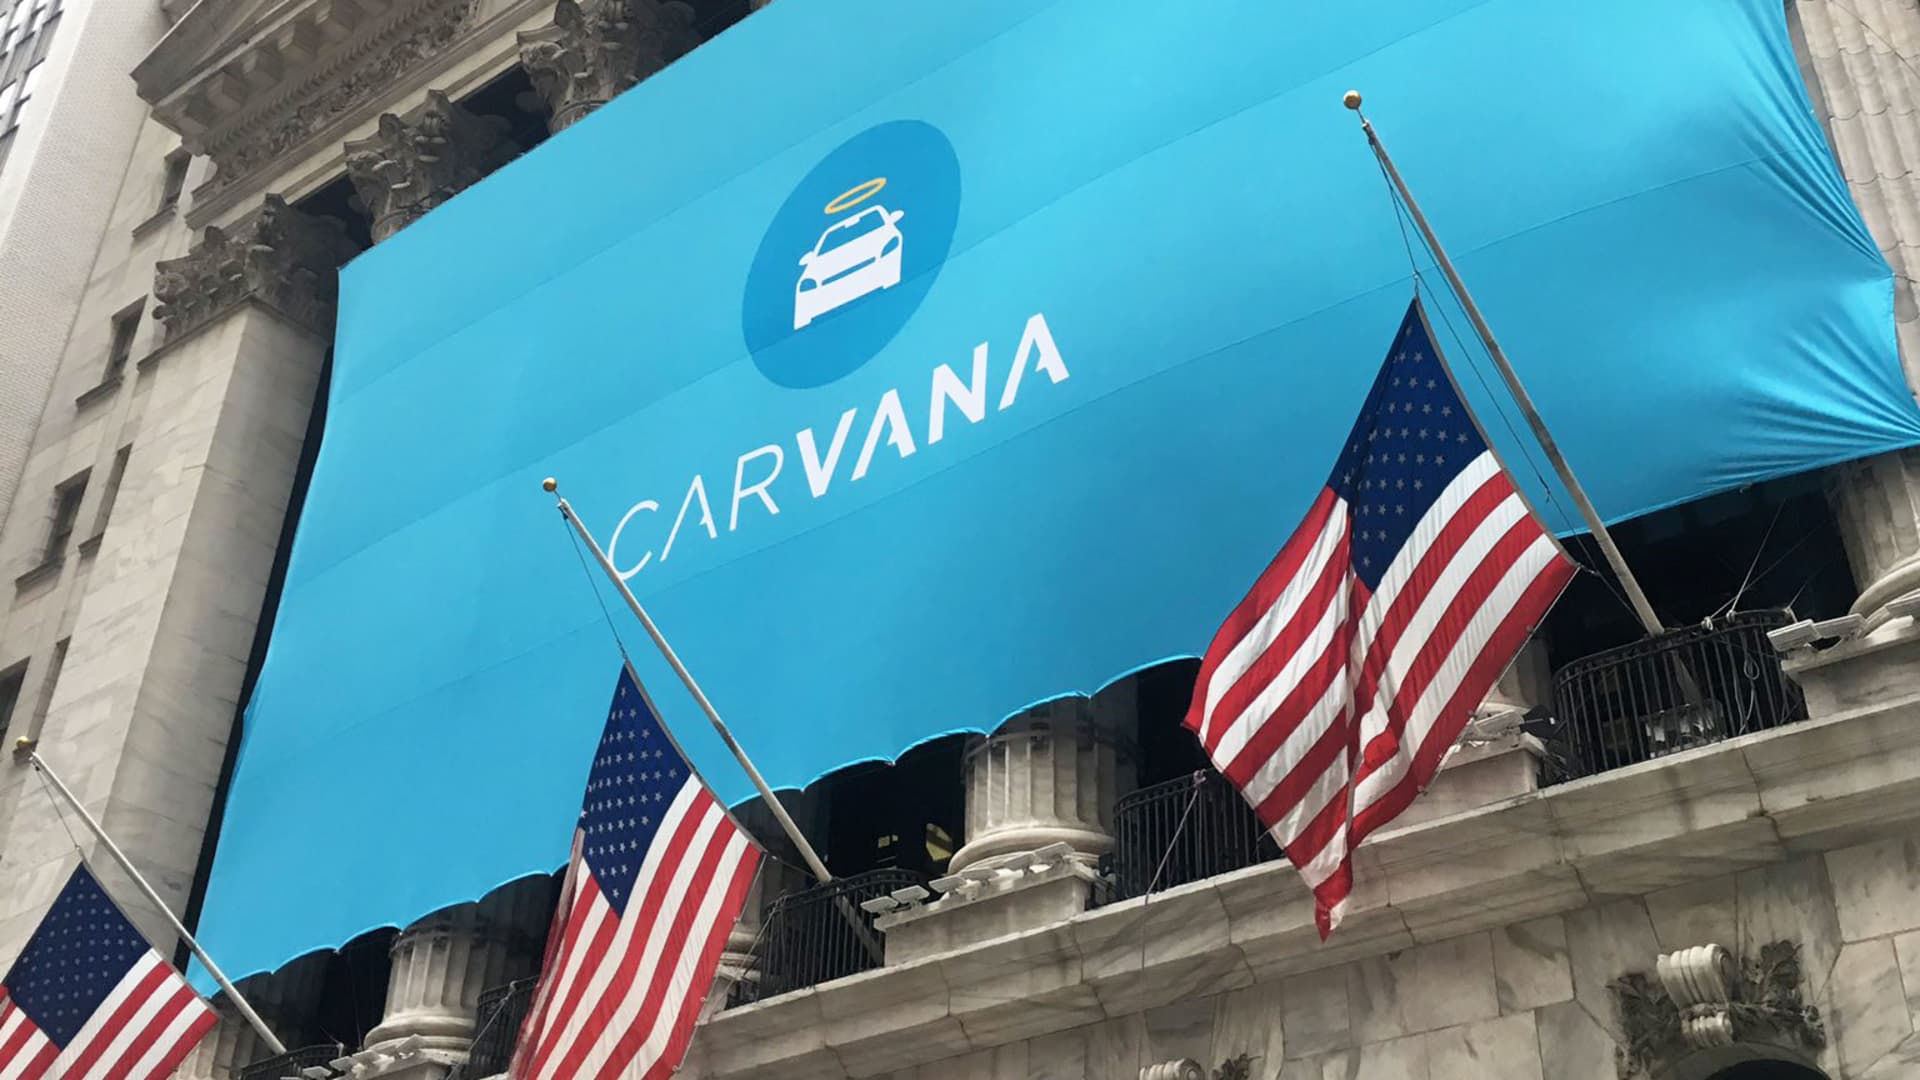 Carvana stock craters as outlook darkens for used vehicle market